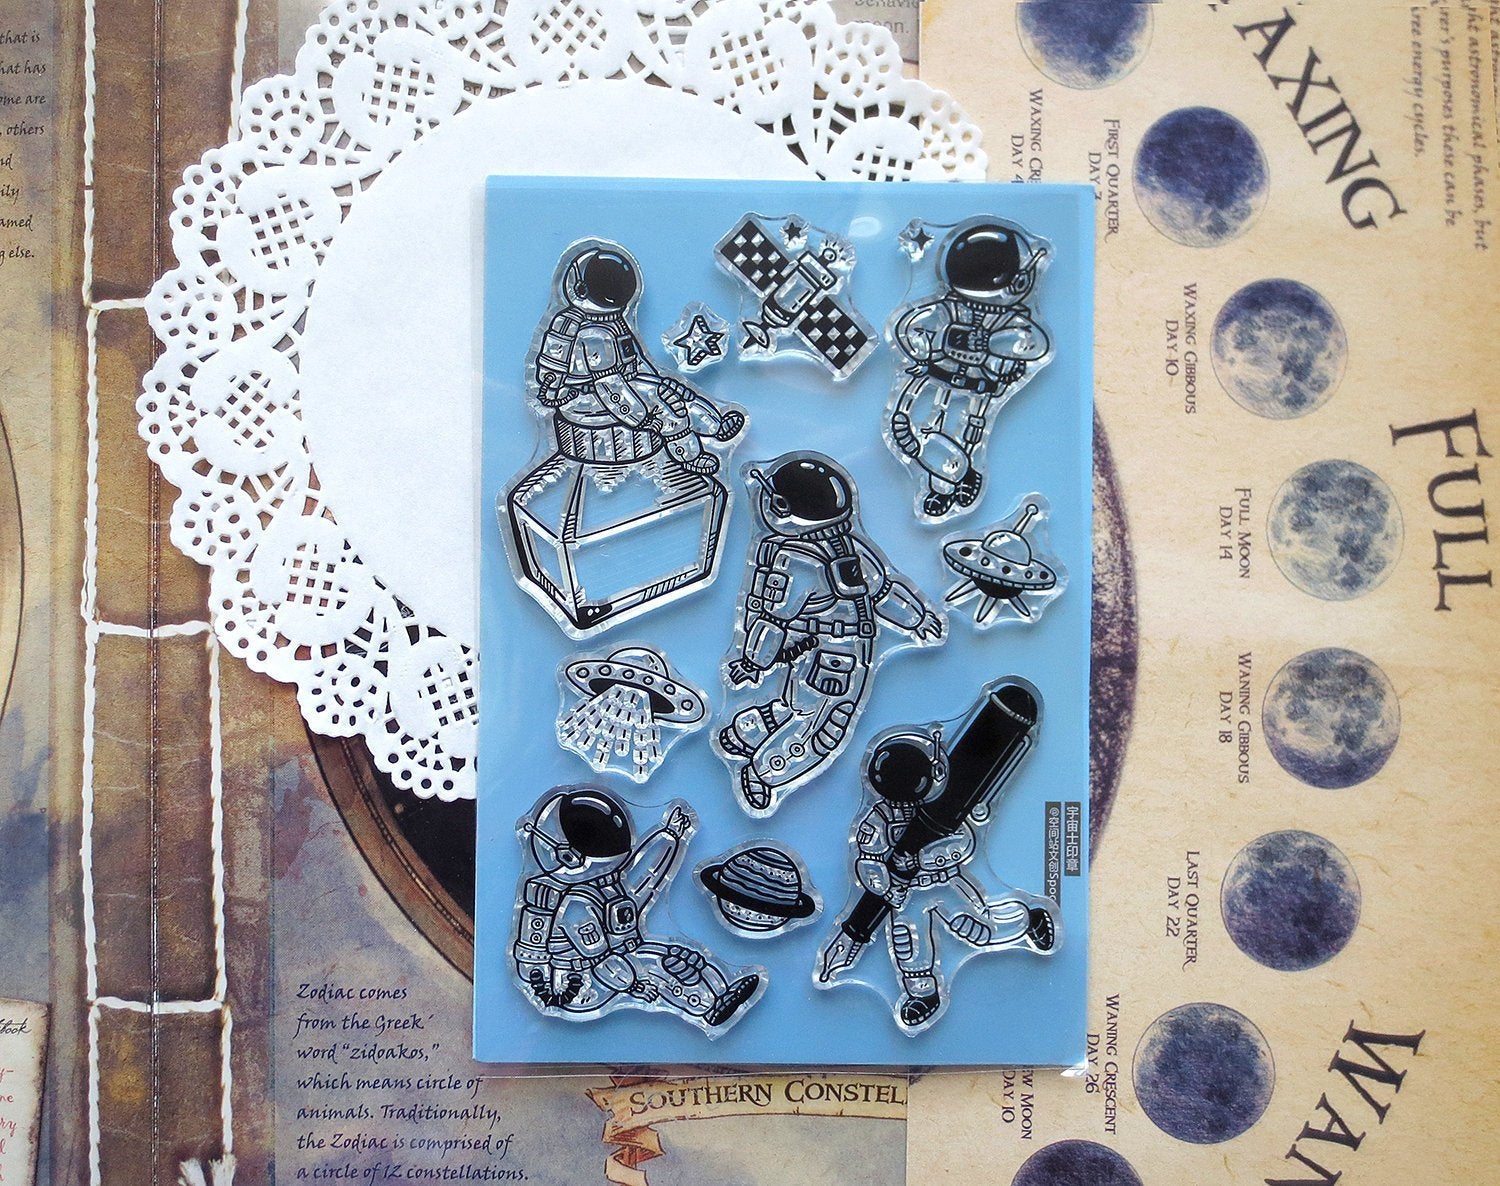 Astronaut and Stationery Acrylic Stamp Set